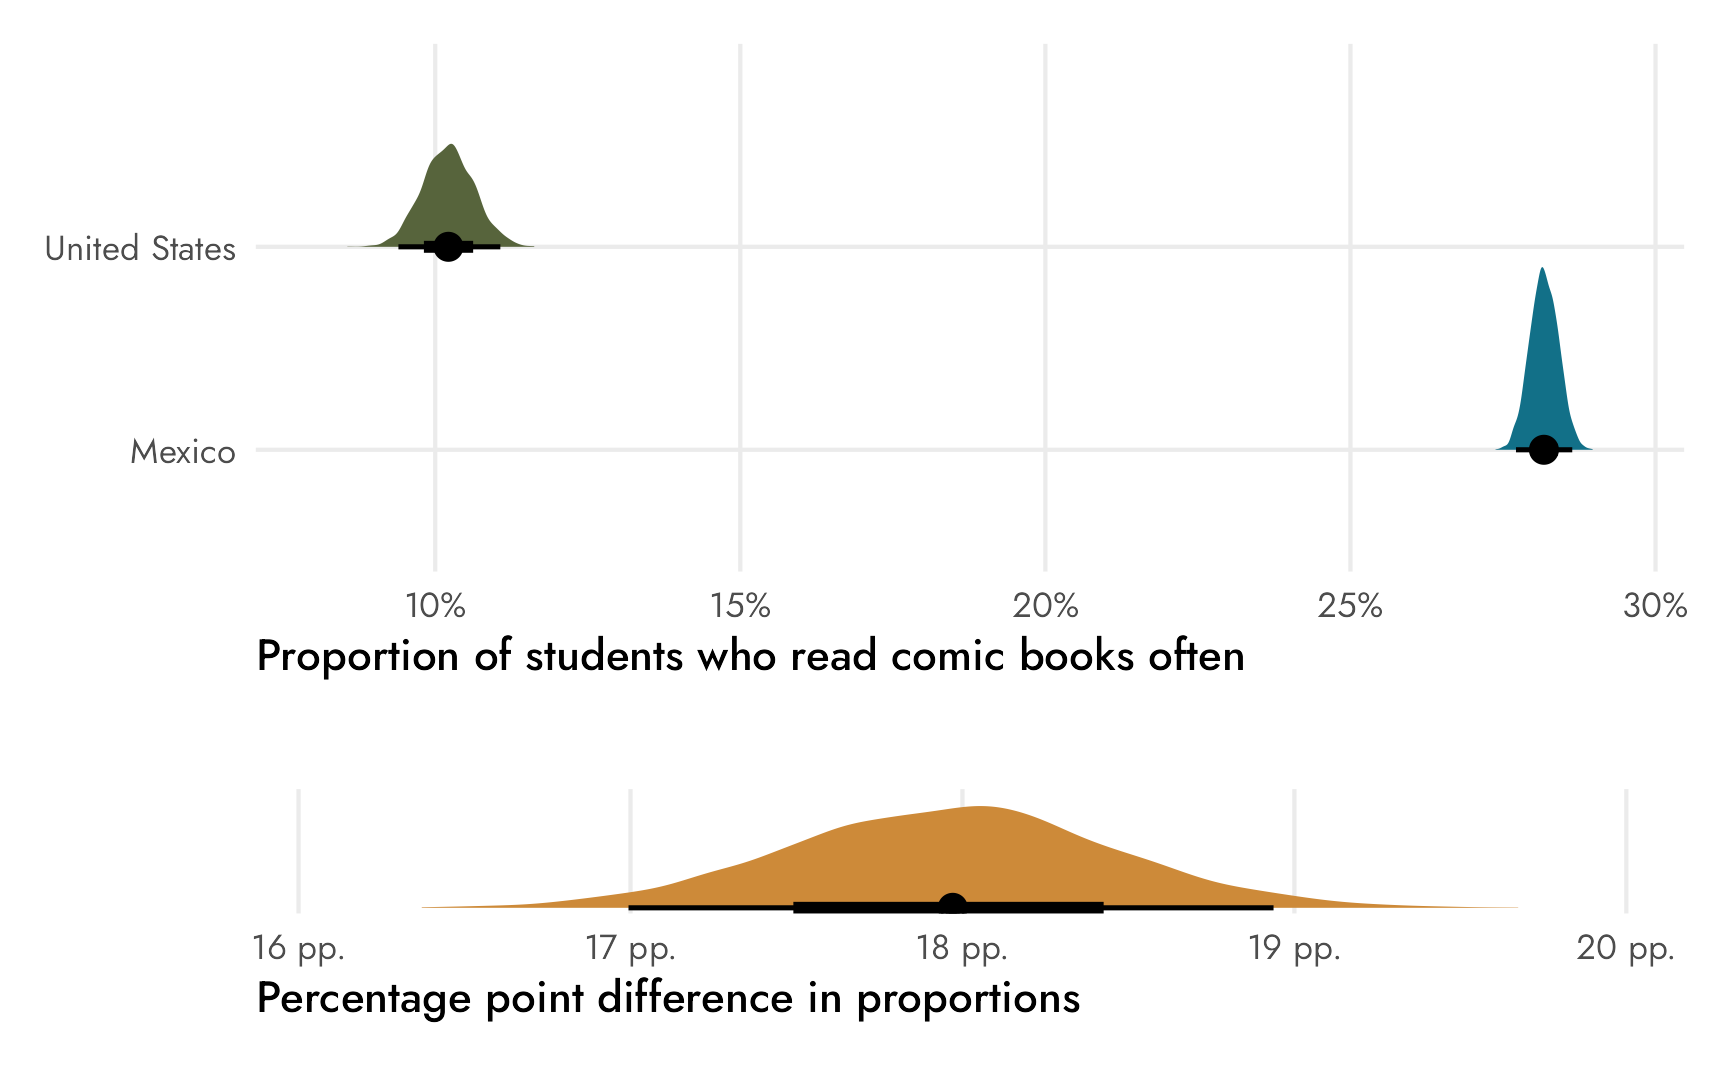 Posterior distribution of the proportions and difference in proportions of students who read comic books often in the United States and Mexico; results from raw Stan code